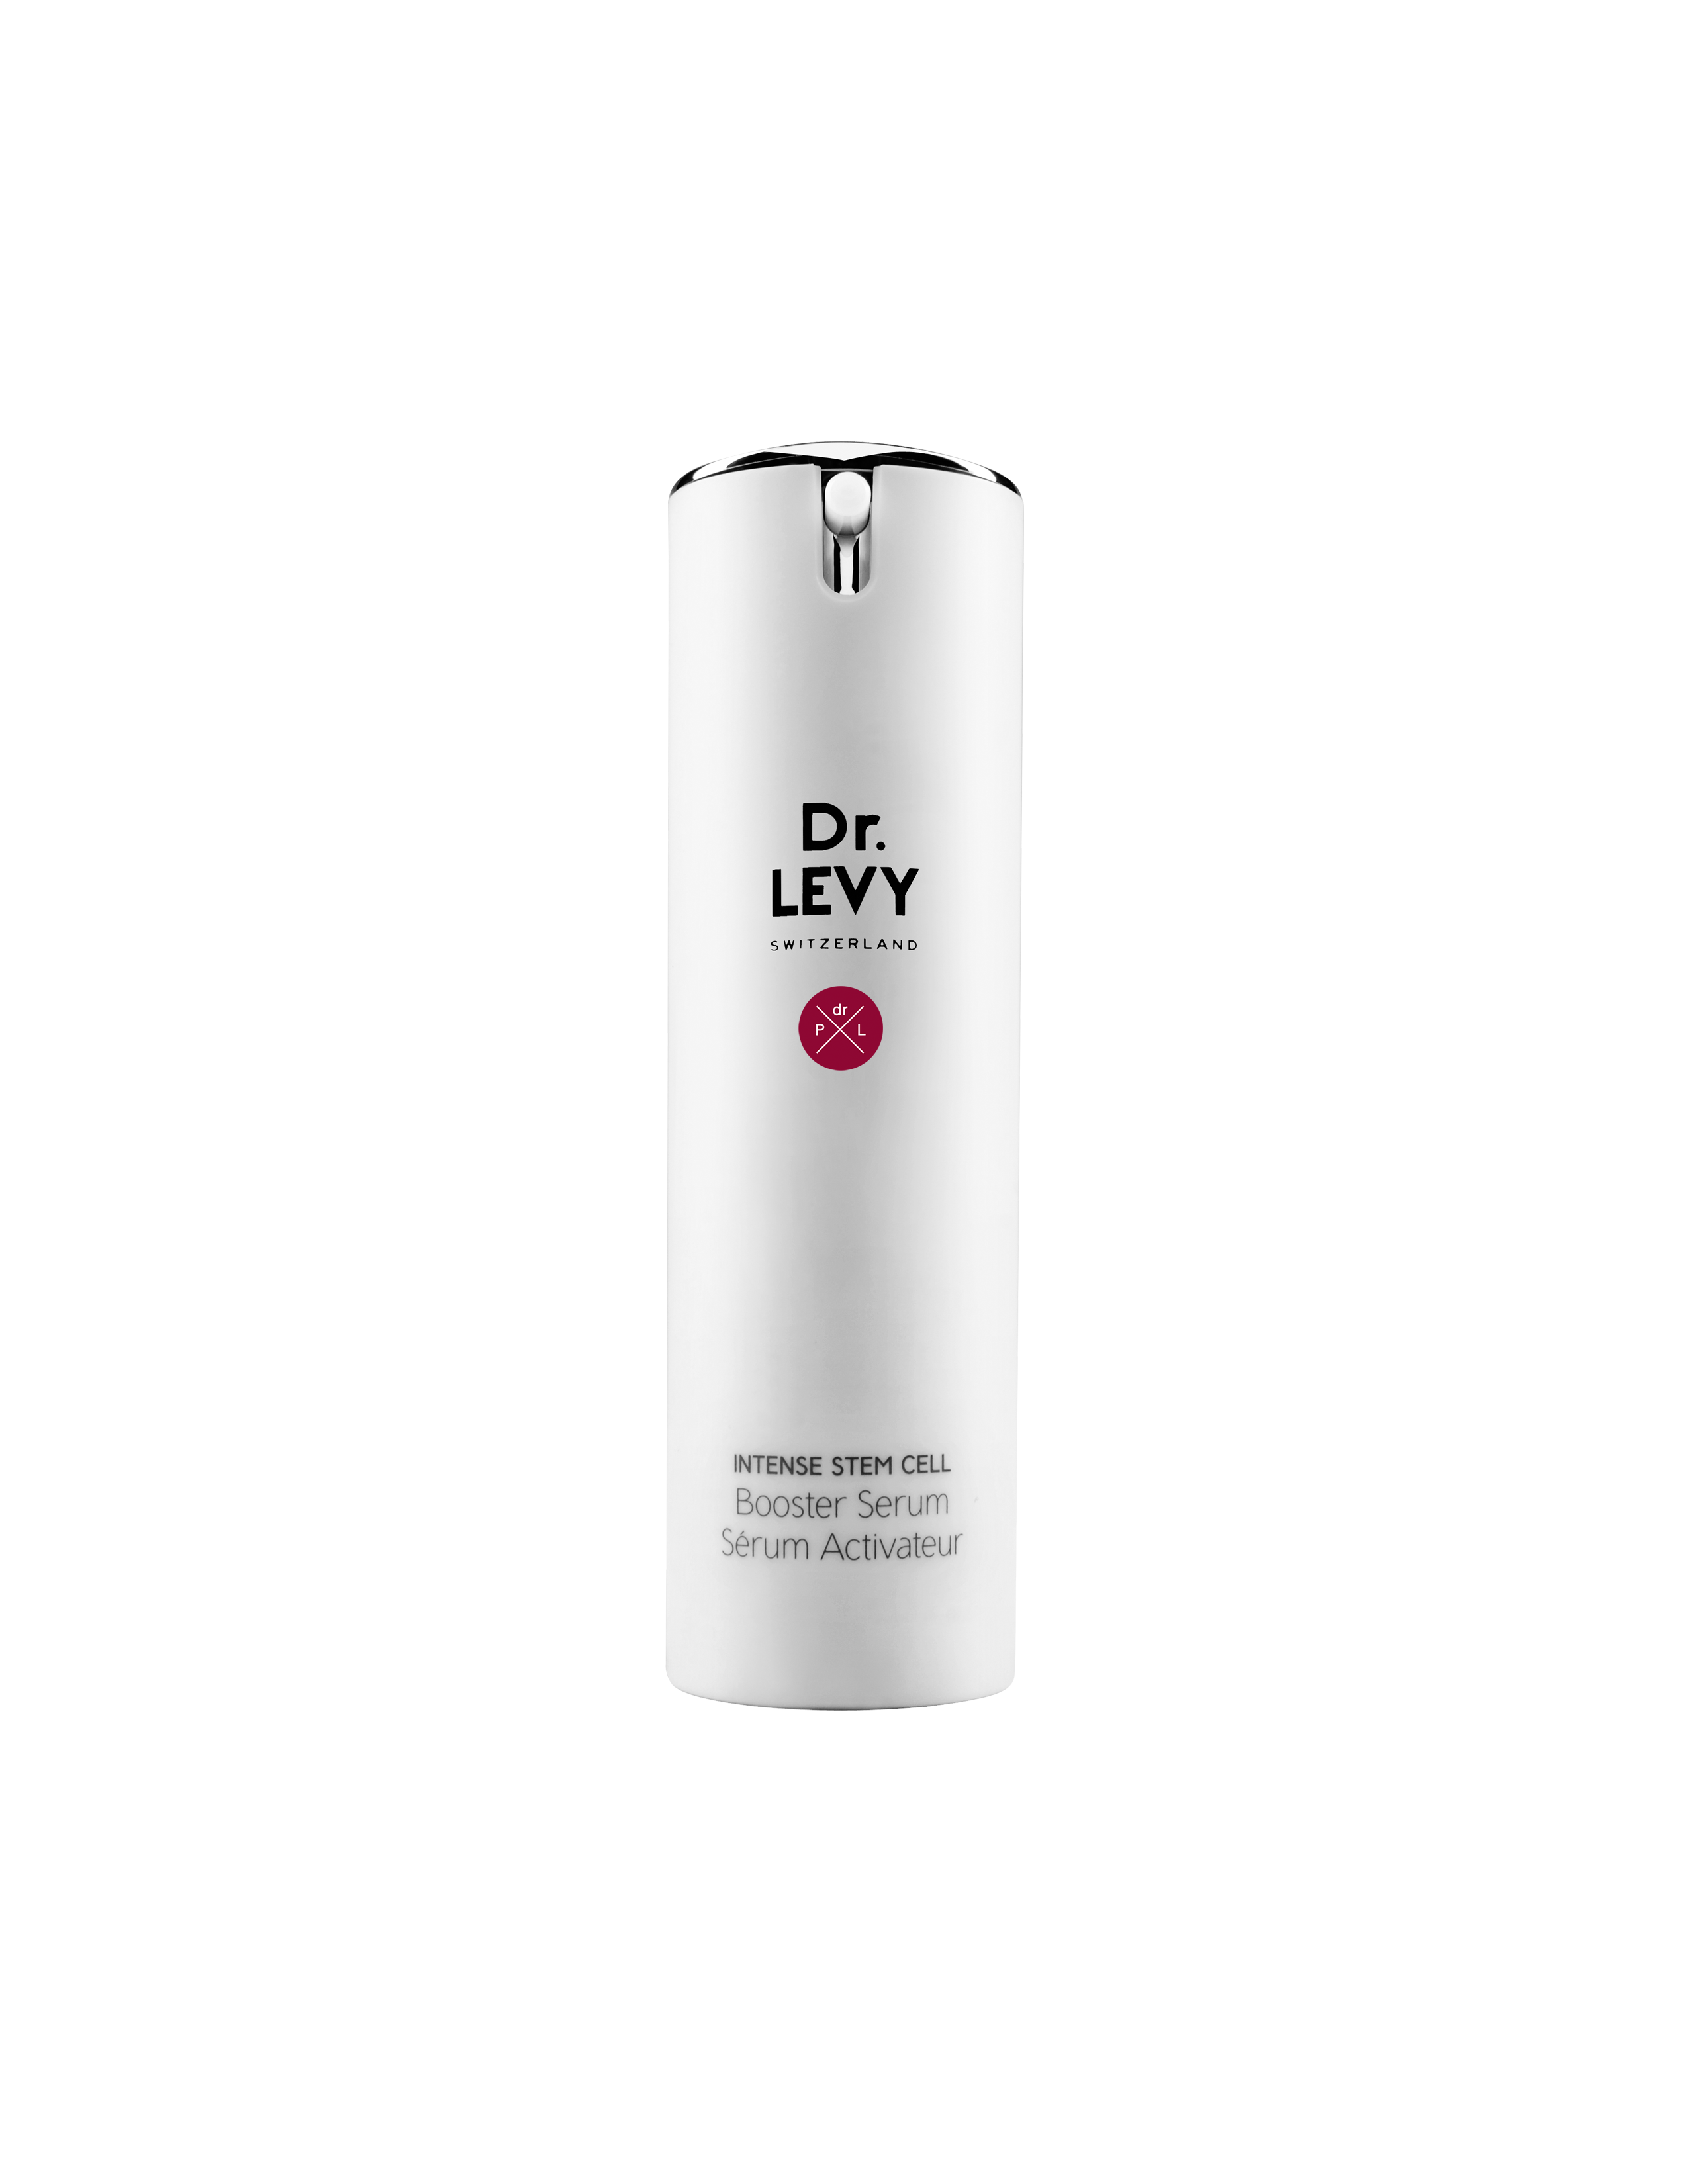 Dr. LEVY | Booster Serum (30ml)